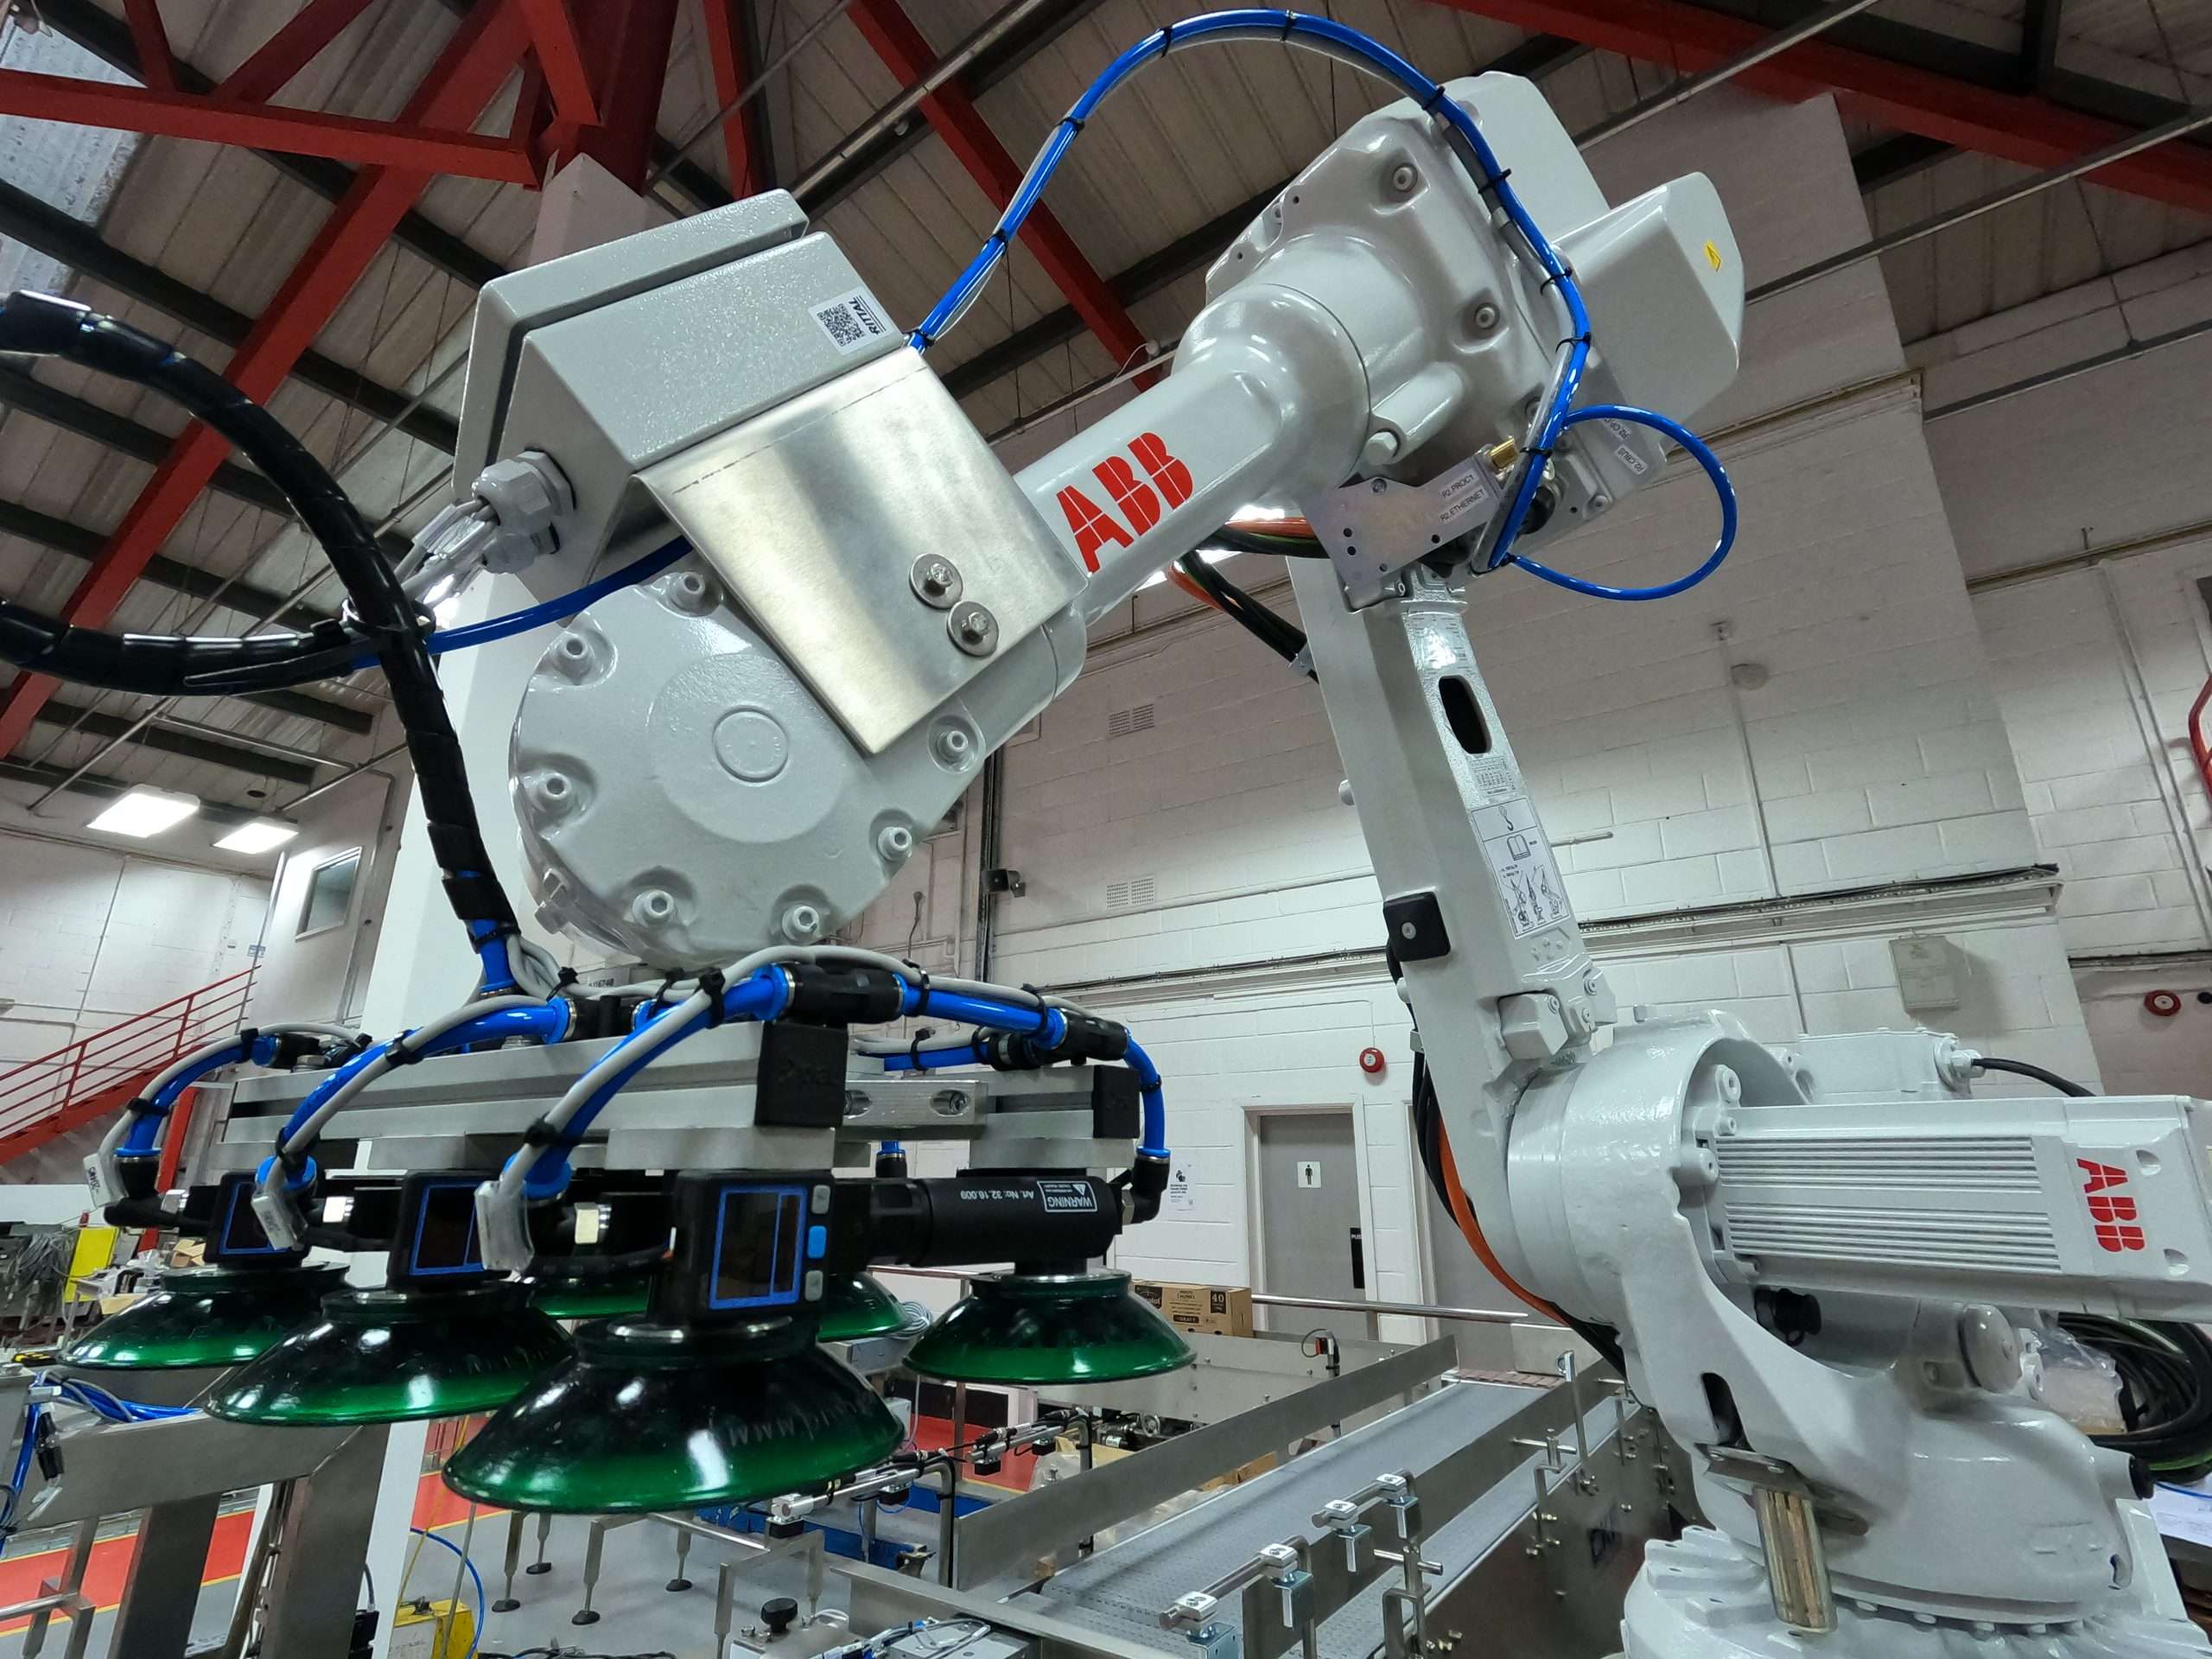 An ABB robot used by CKF in a case packer